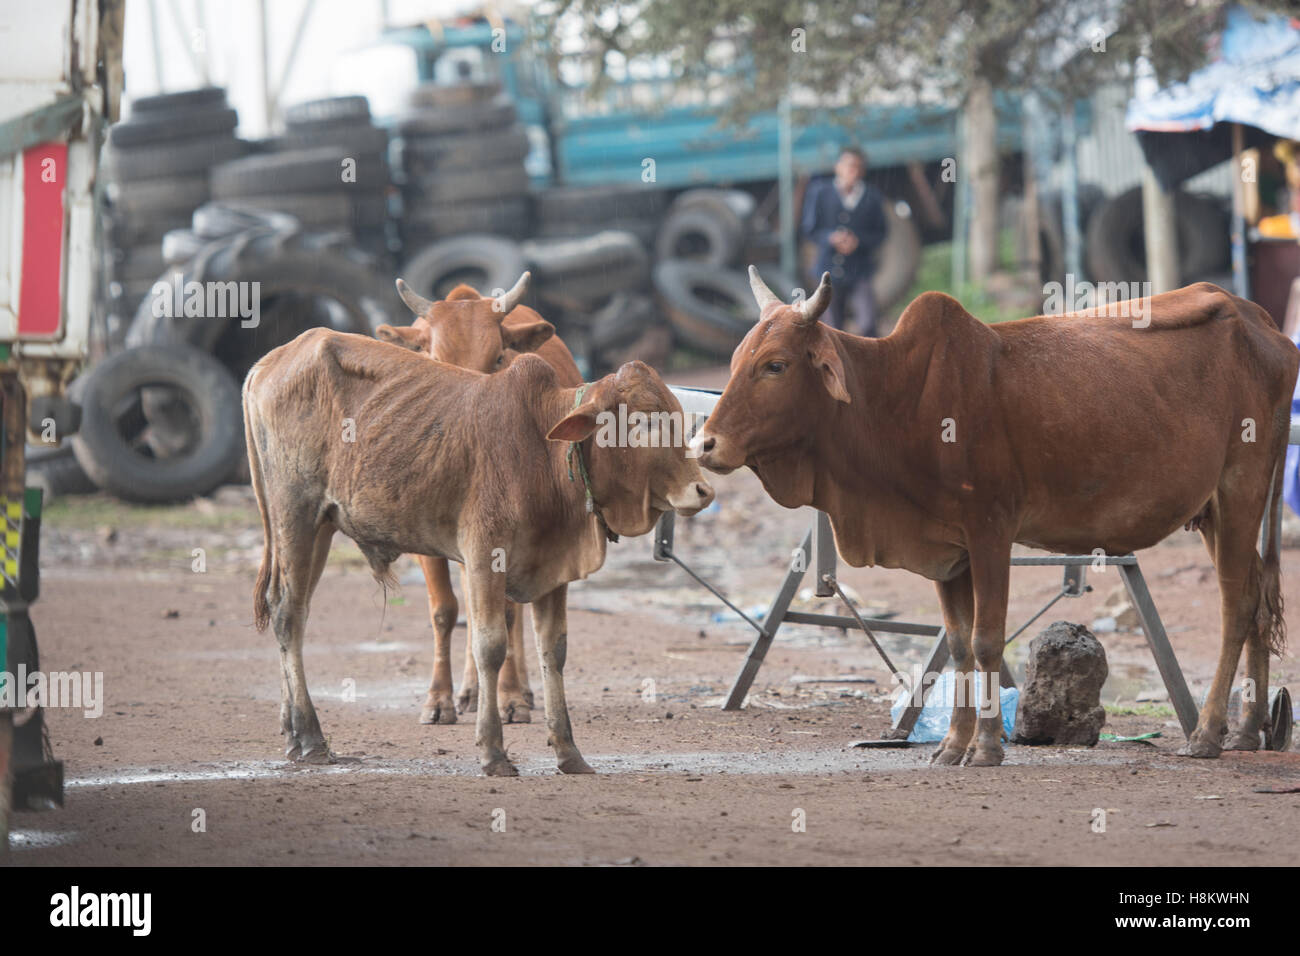 Addis Ababa, Ethiopia - Cattle standing in the dirt roads of Addis Ababa. Stock Photo